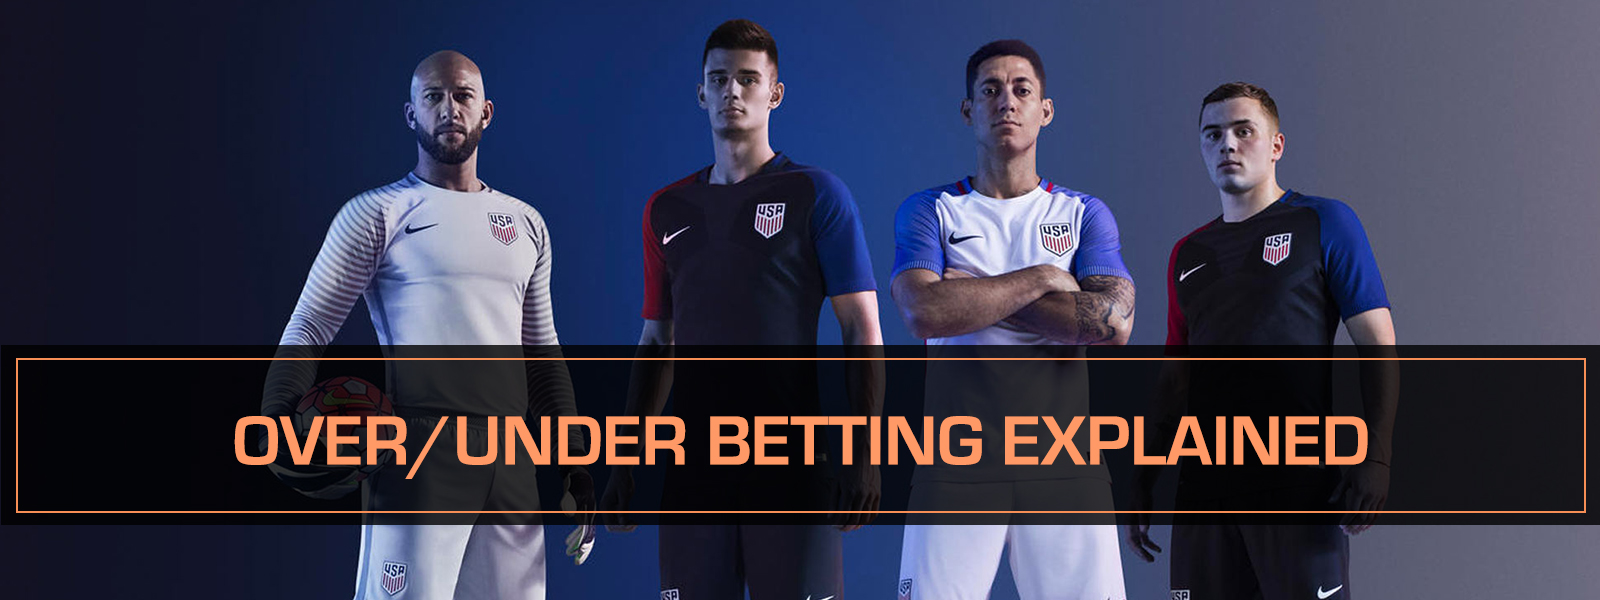 Over/Under Betting Explained